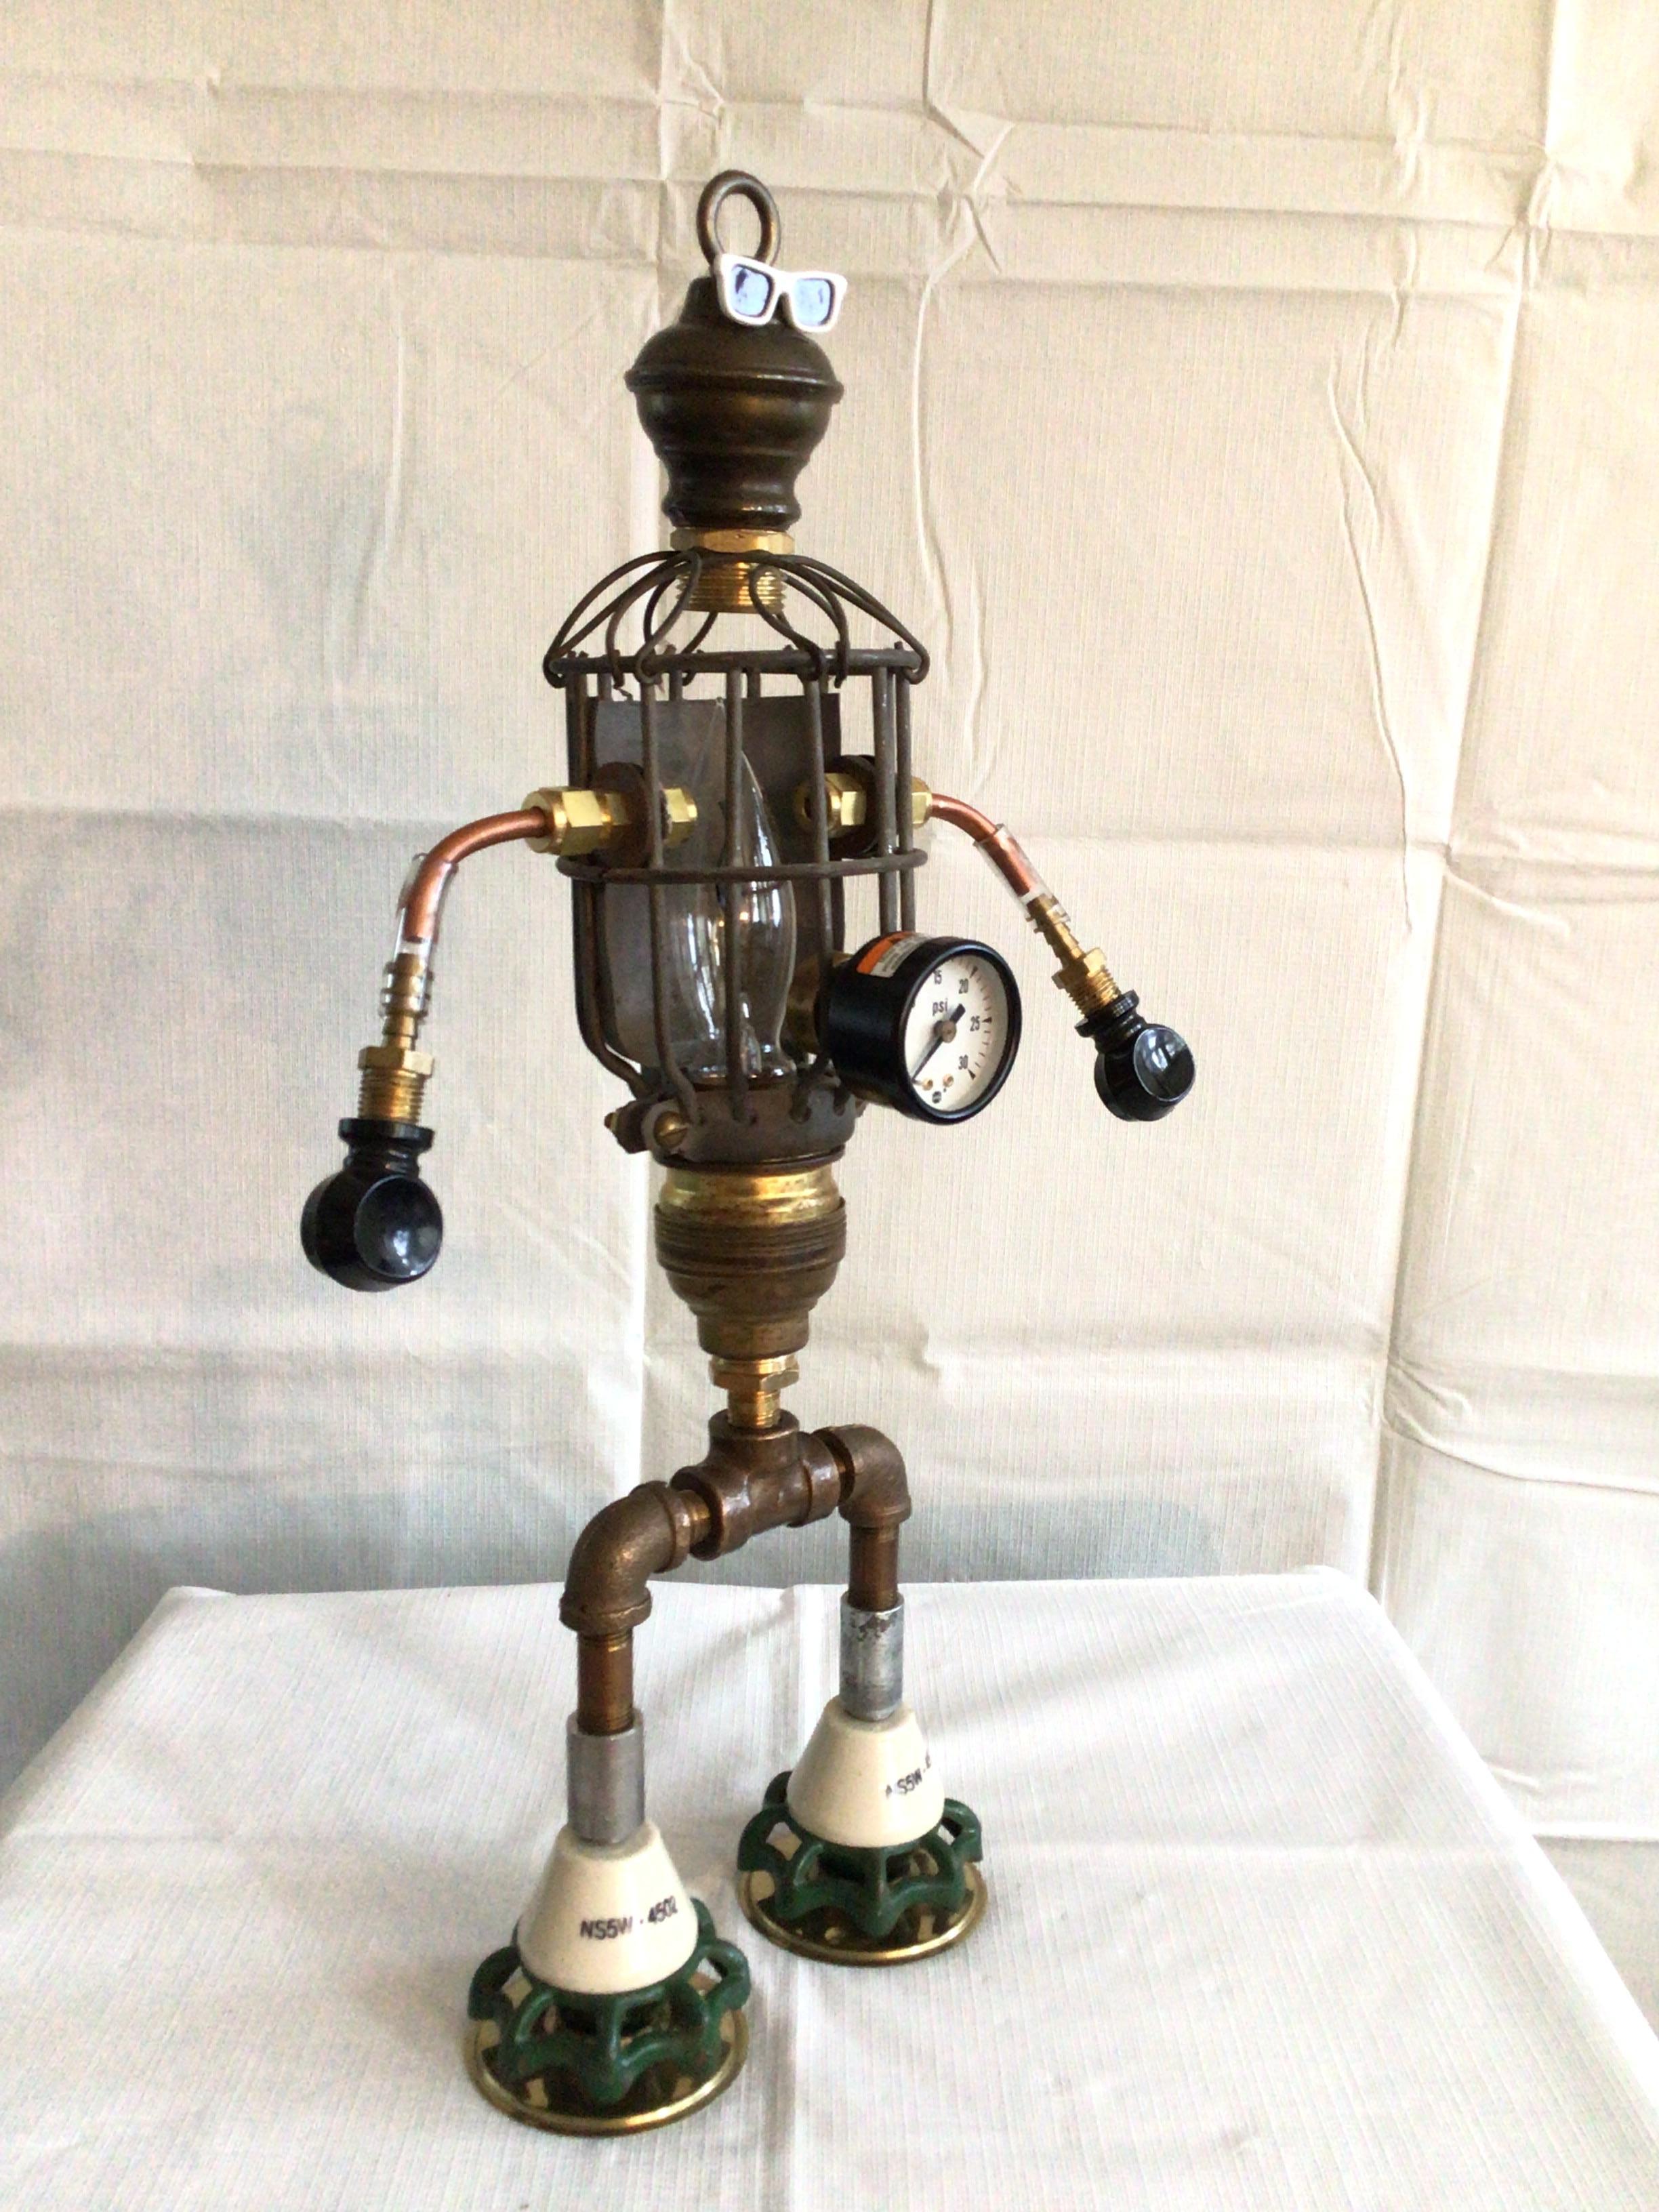 2020 Handmade Industrial Robot with Flickering Light In Good Condition For Sale In Tarrytown, NY